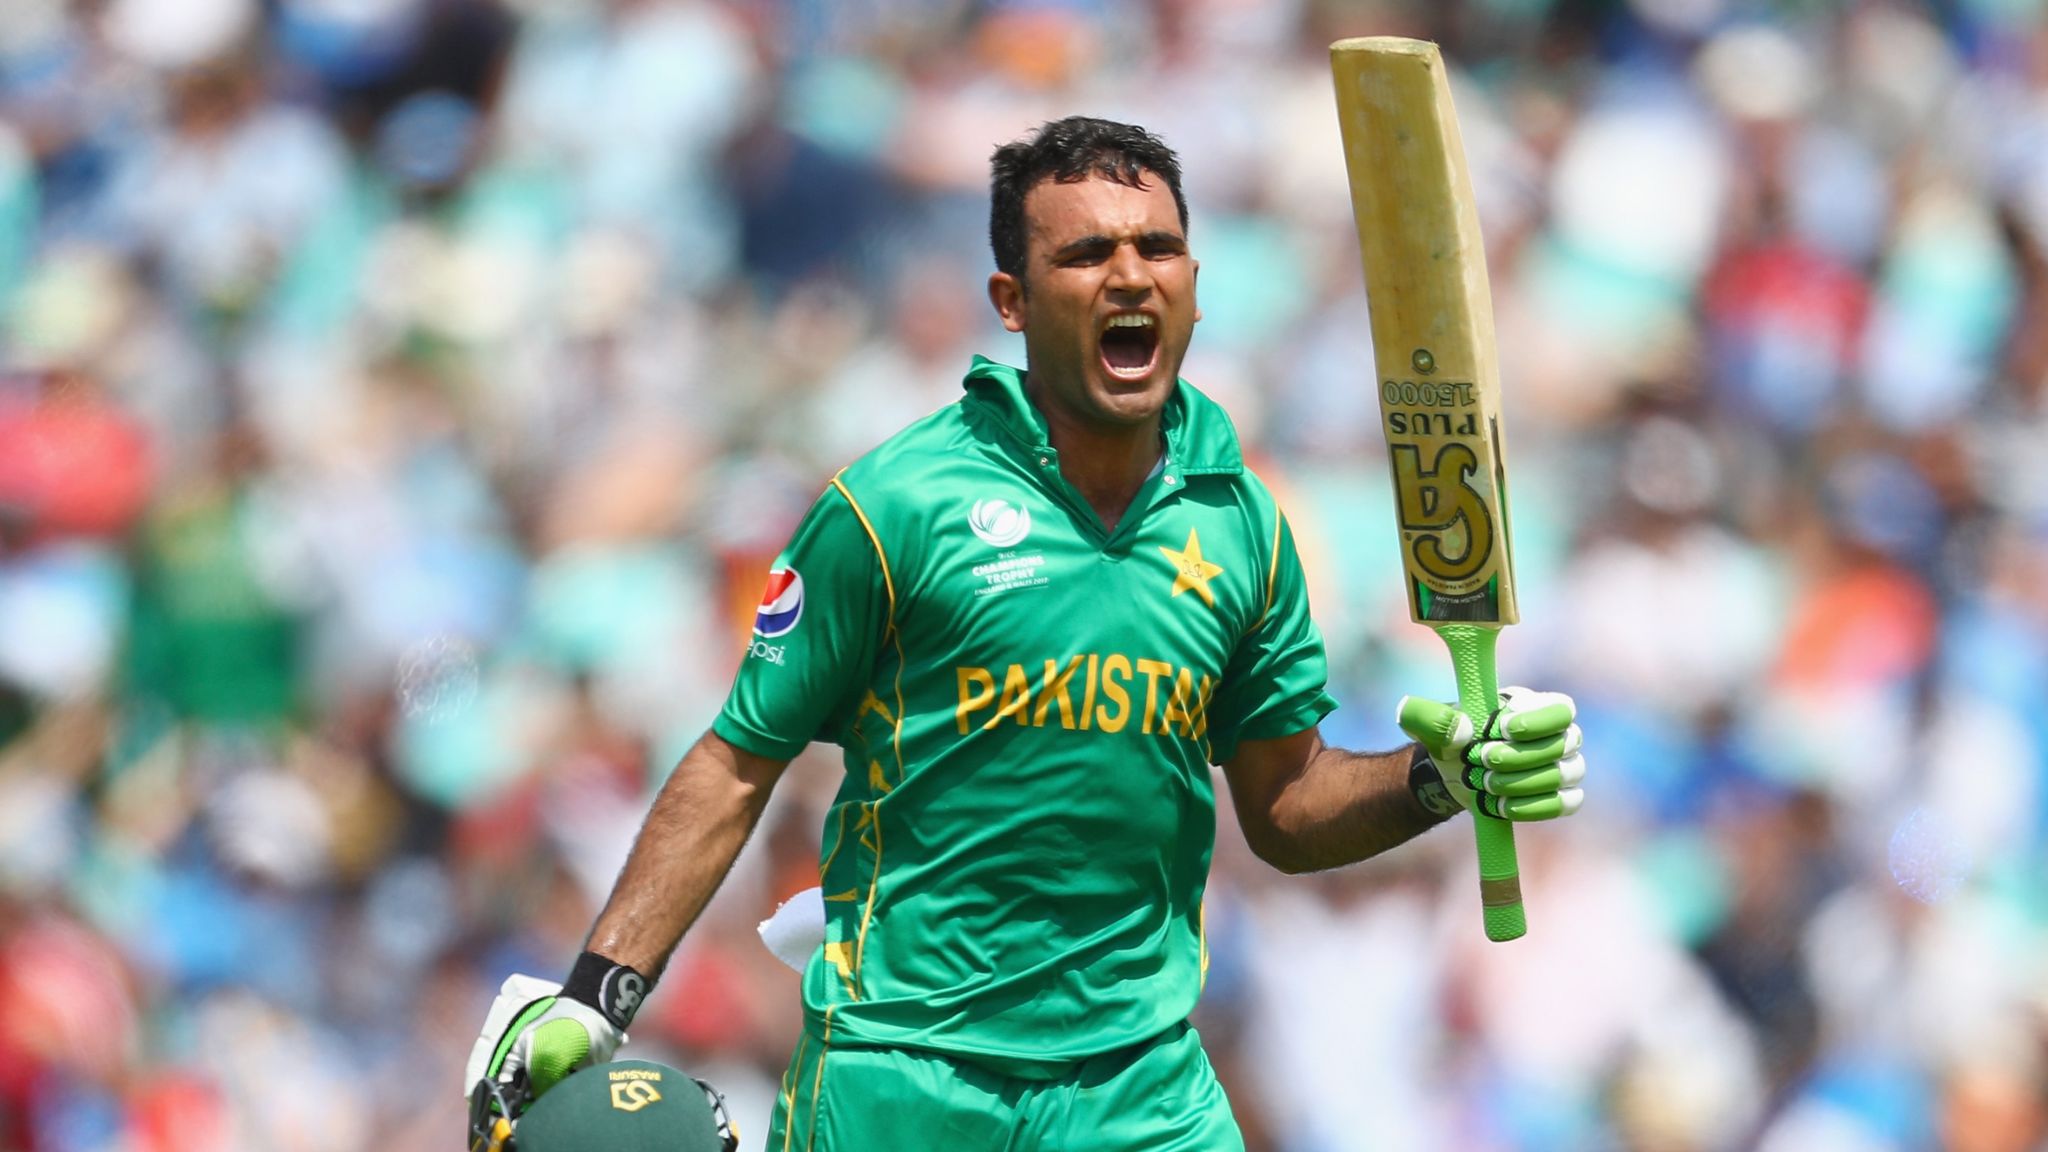 Pakistan's Fakhar Zaman aims to win World Cup and break into Test team |  Cricket News | Sky Sports